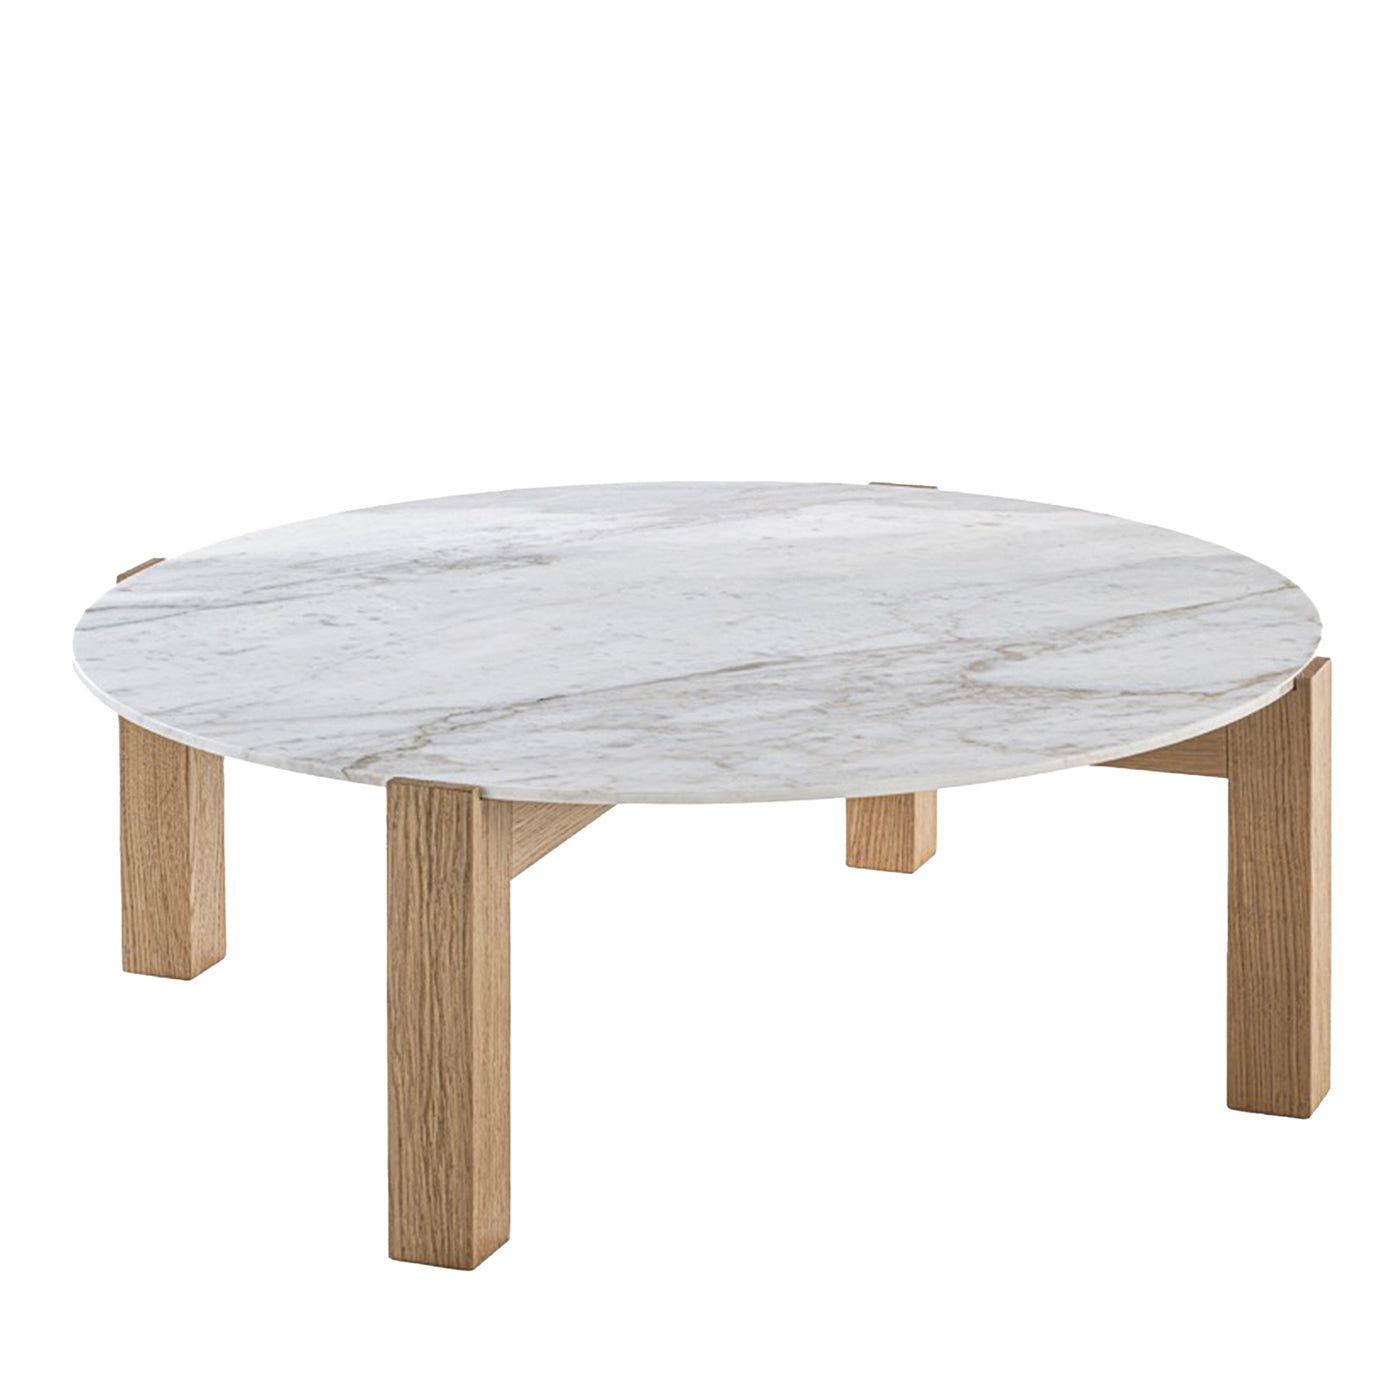 Moon 1 Round White Marble Coffee Table - Main view